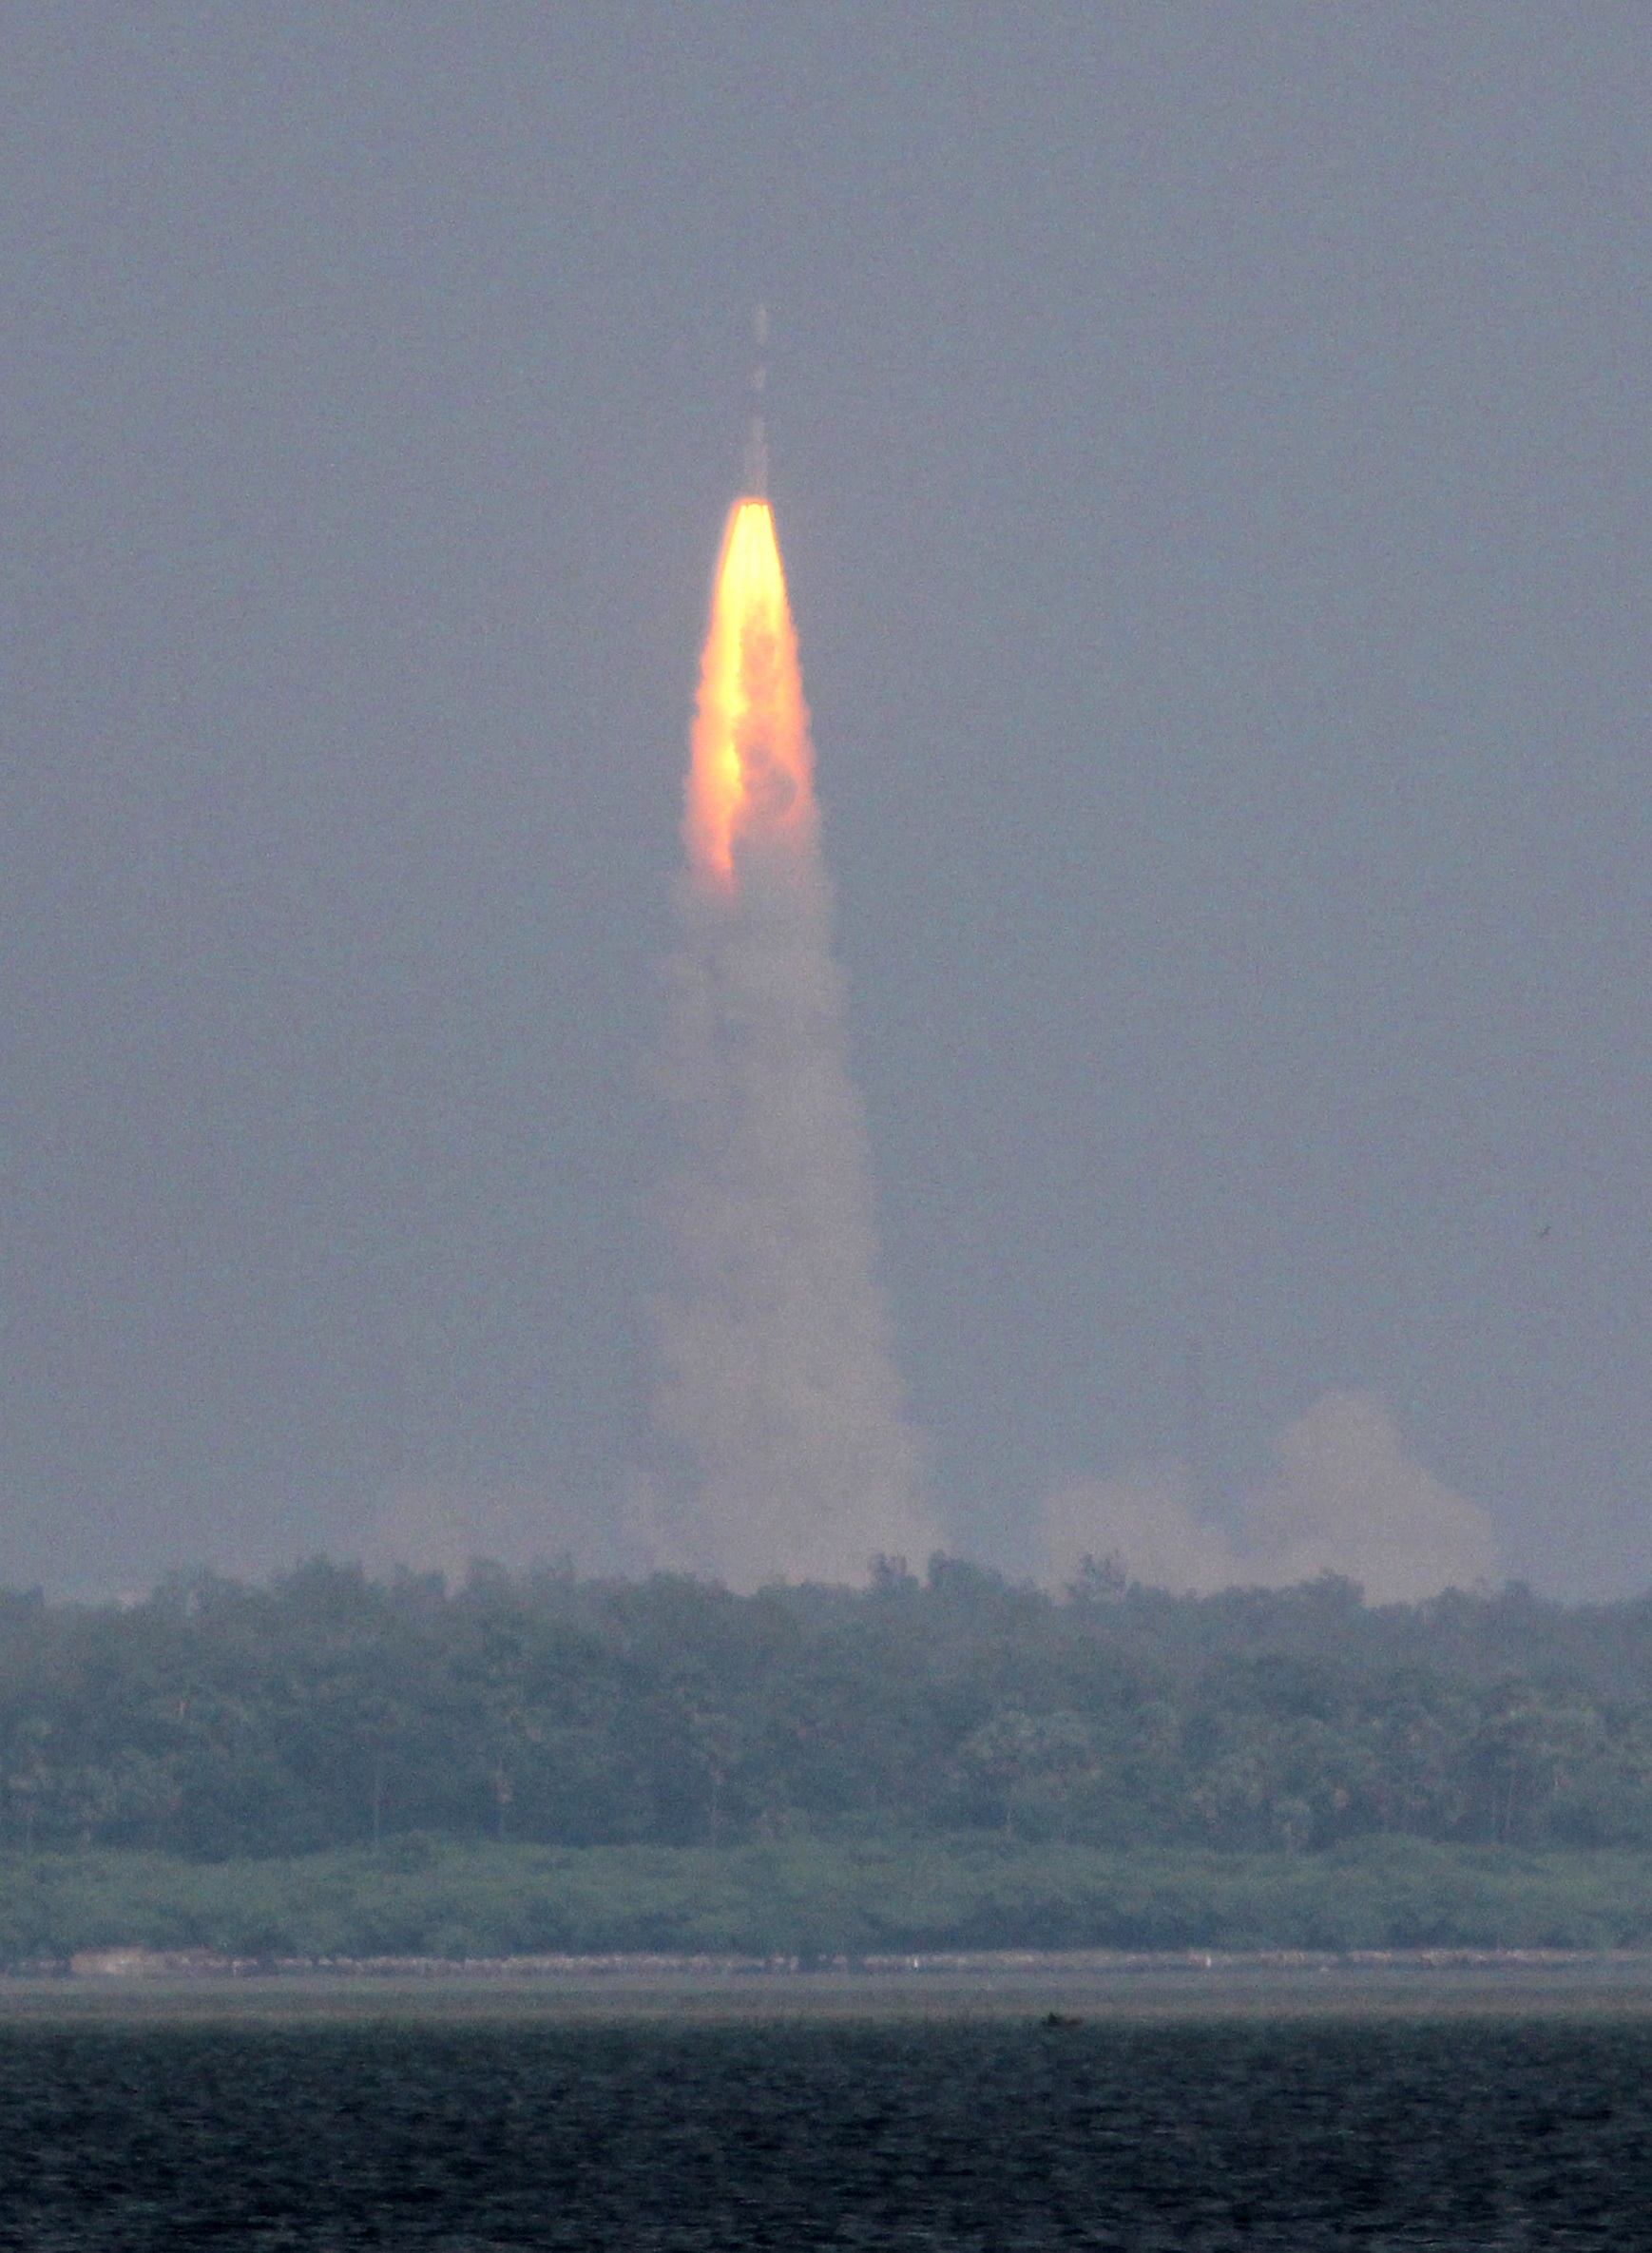 The Polar Satellite Launch Vehicle rocket lifts off carrying India's Mars spacecraft from the east-coast island of Sriharikota, India, Nov. 2013.